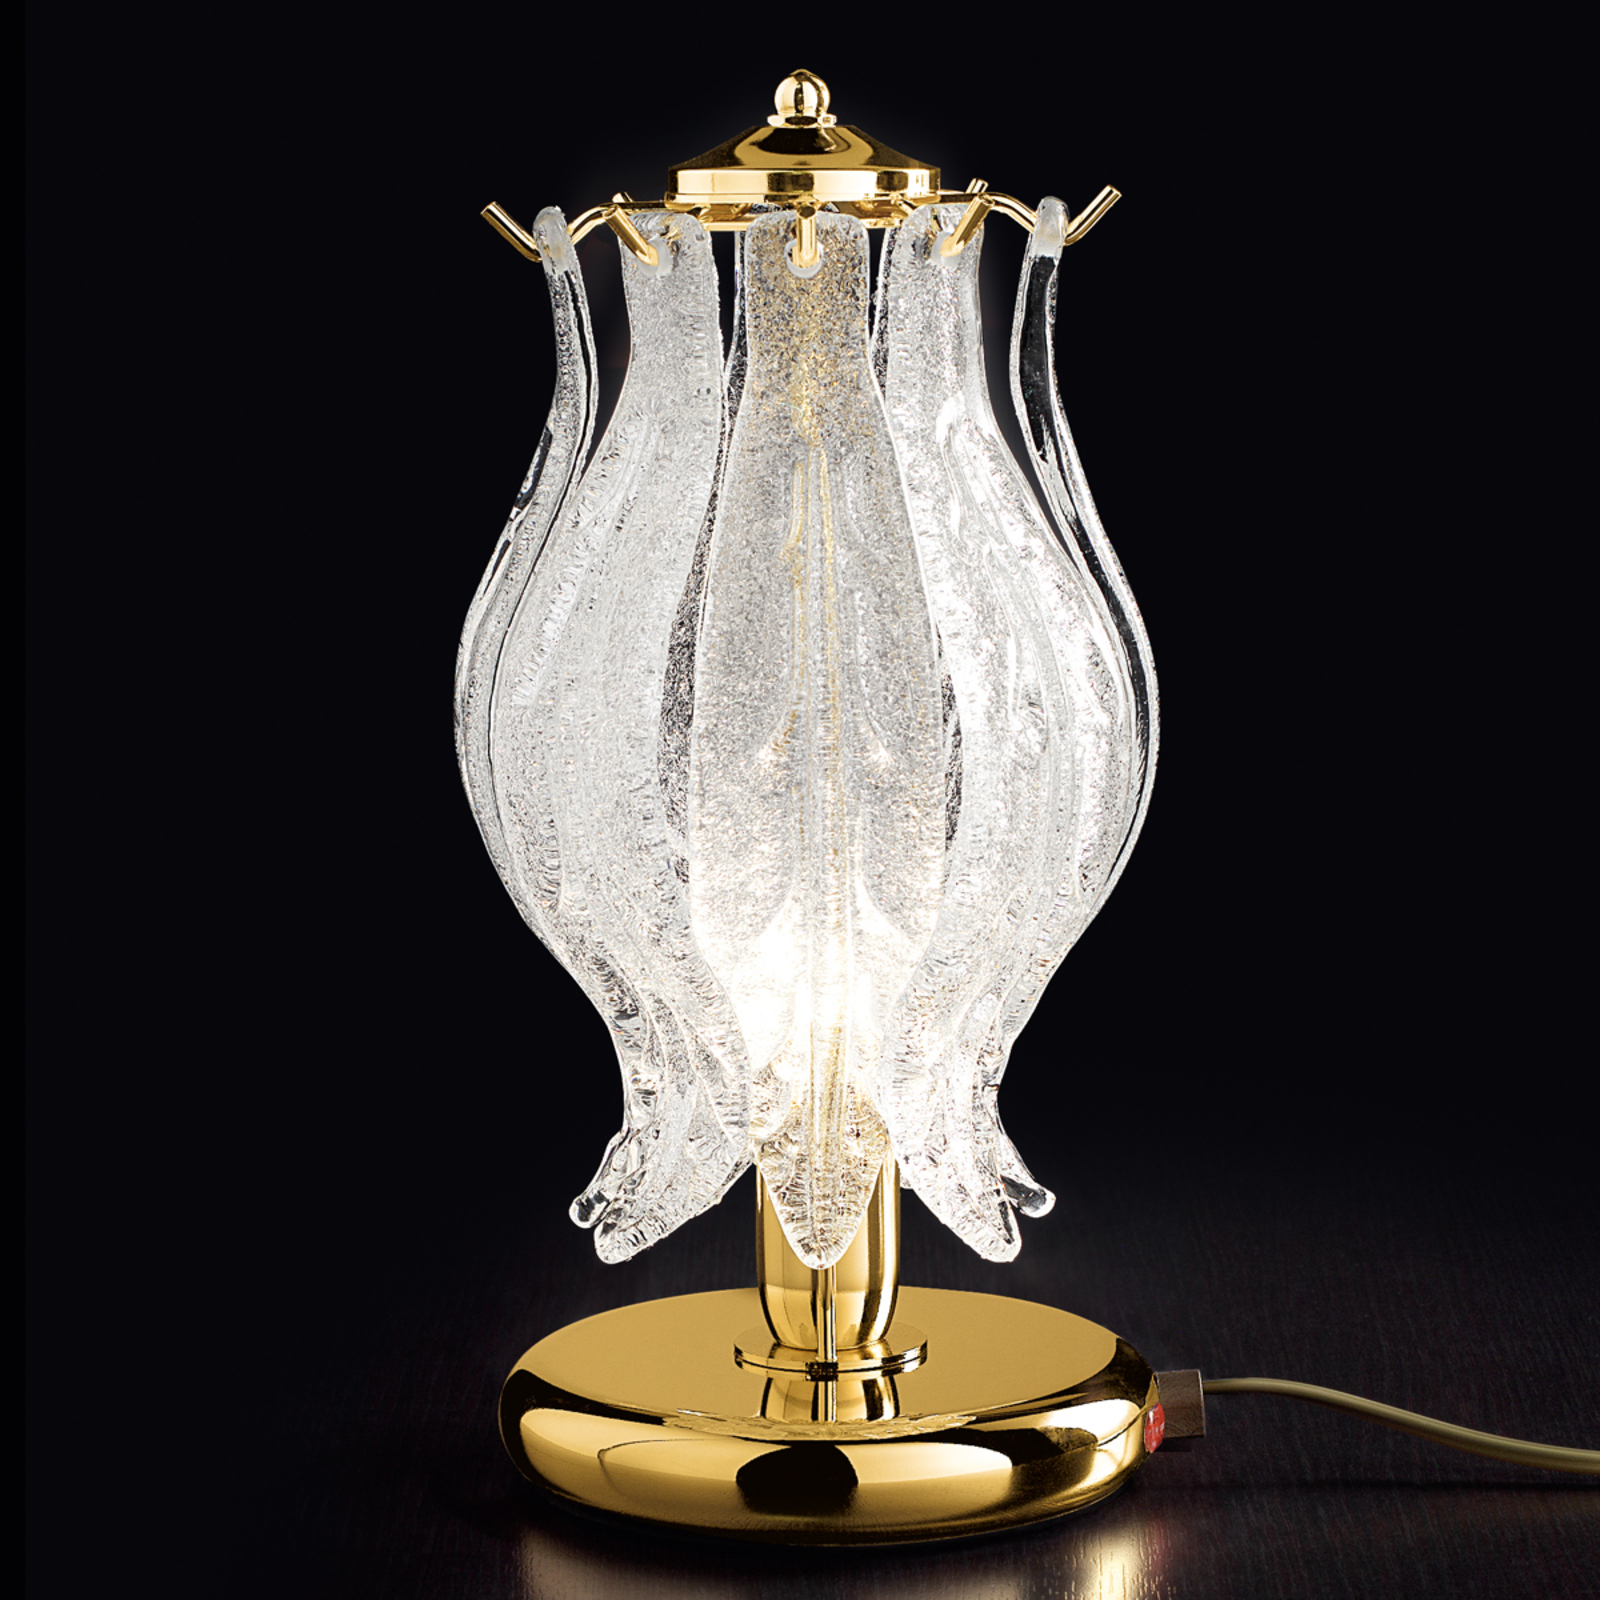 Petali table lamp with Murano glass 31 cm